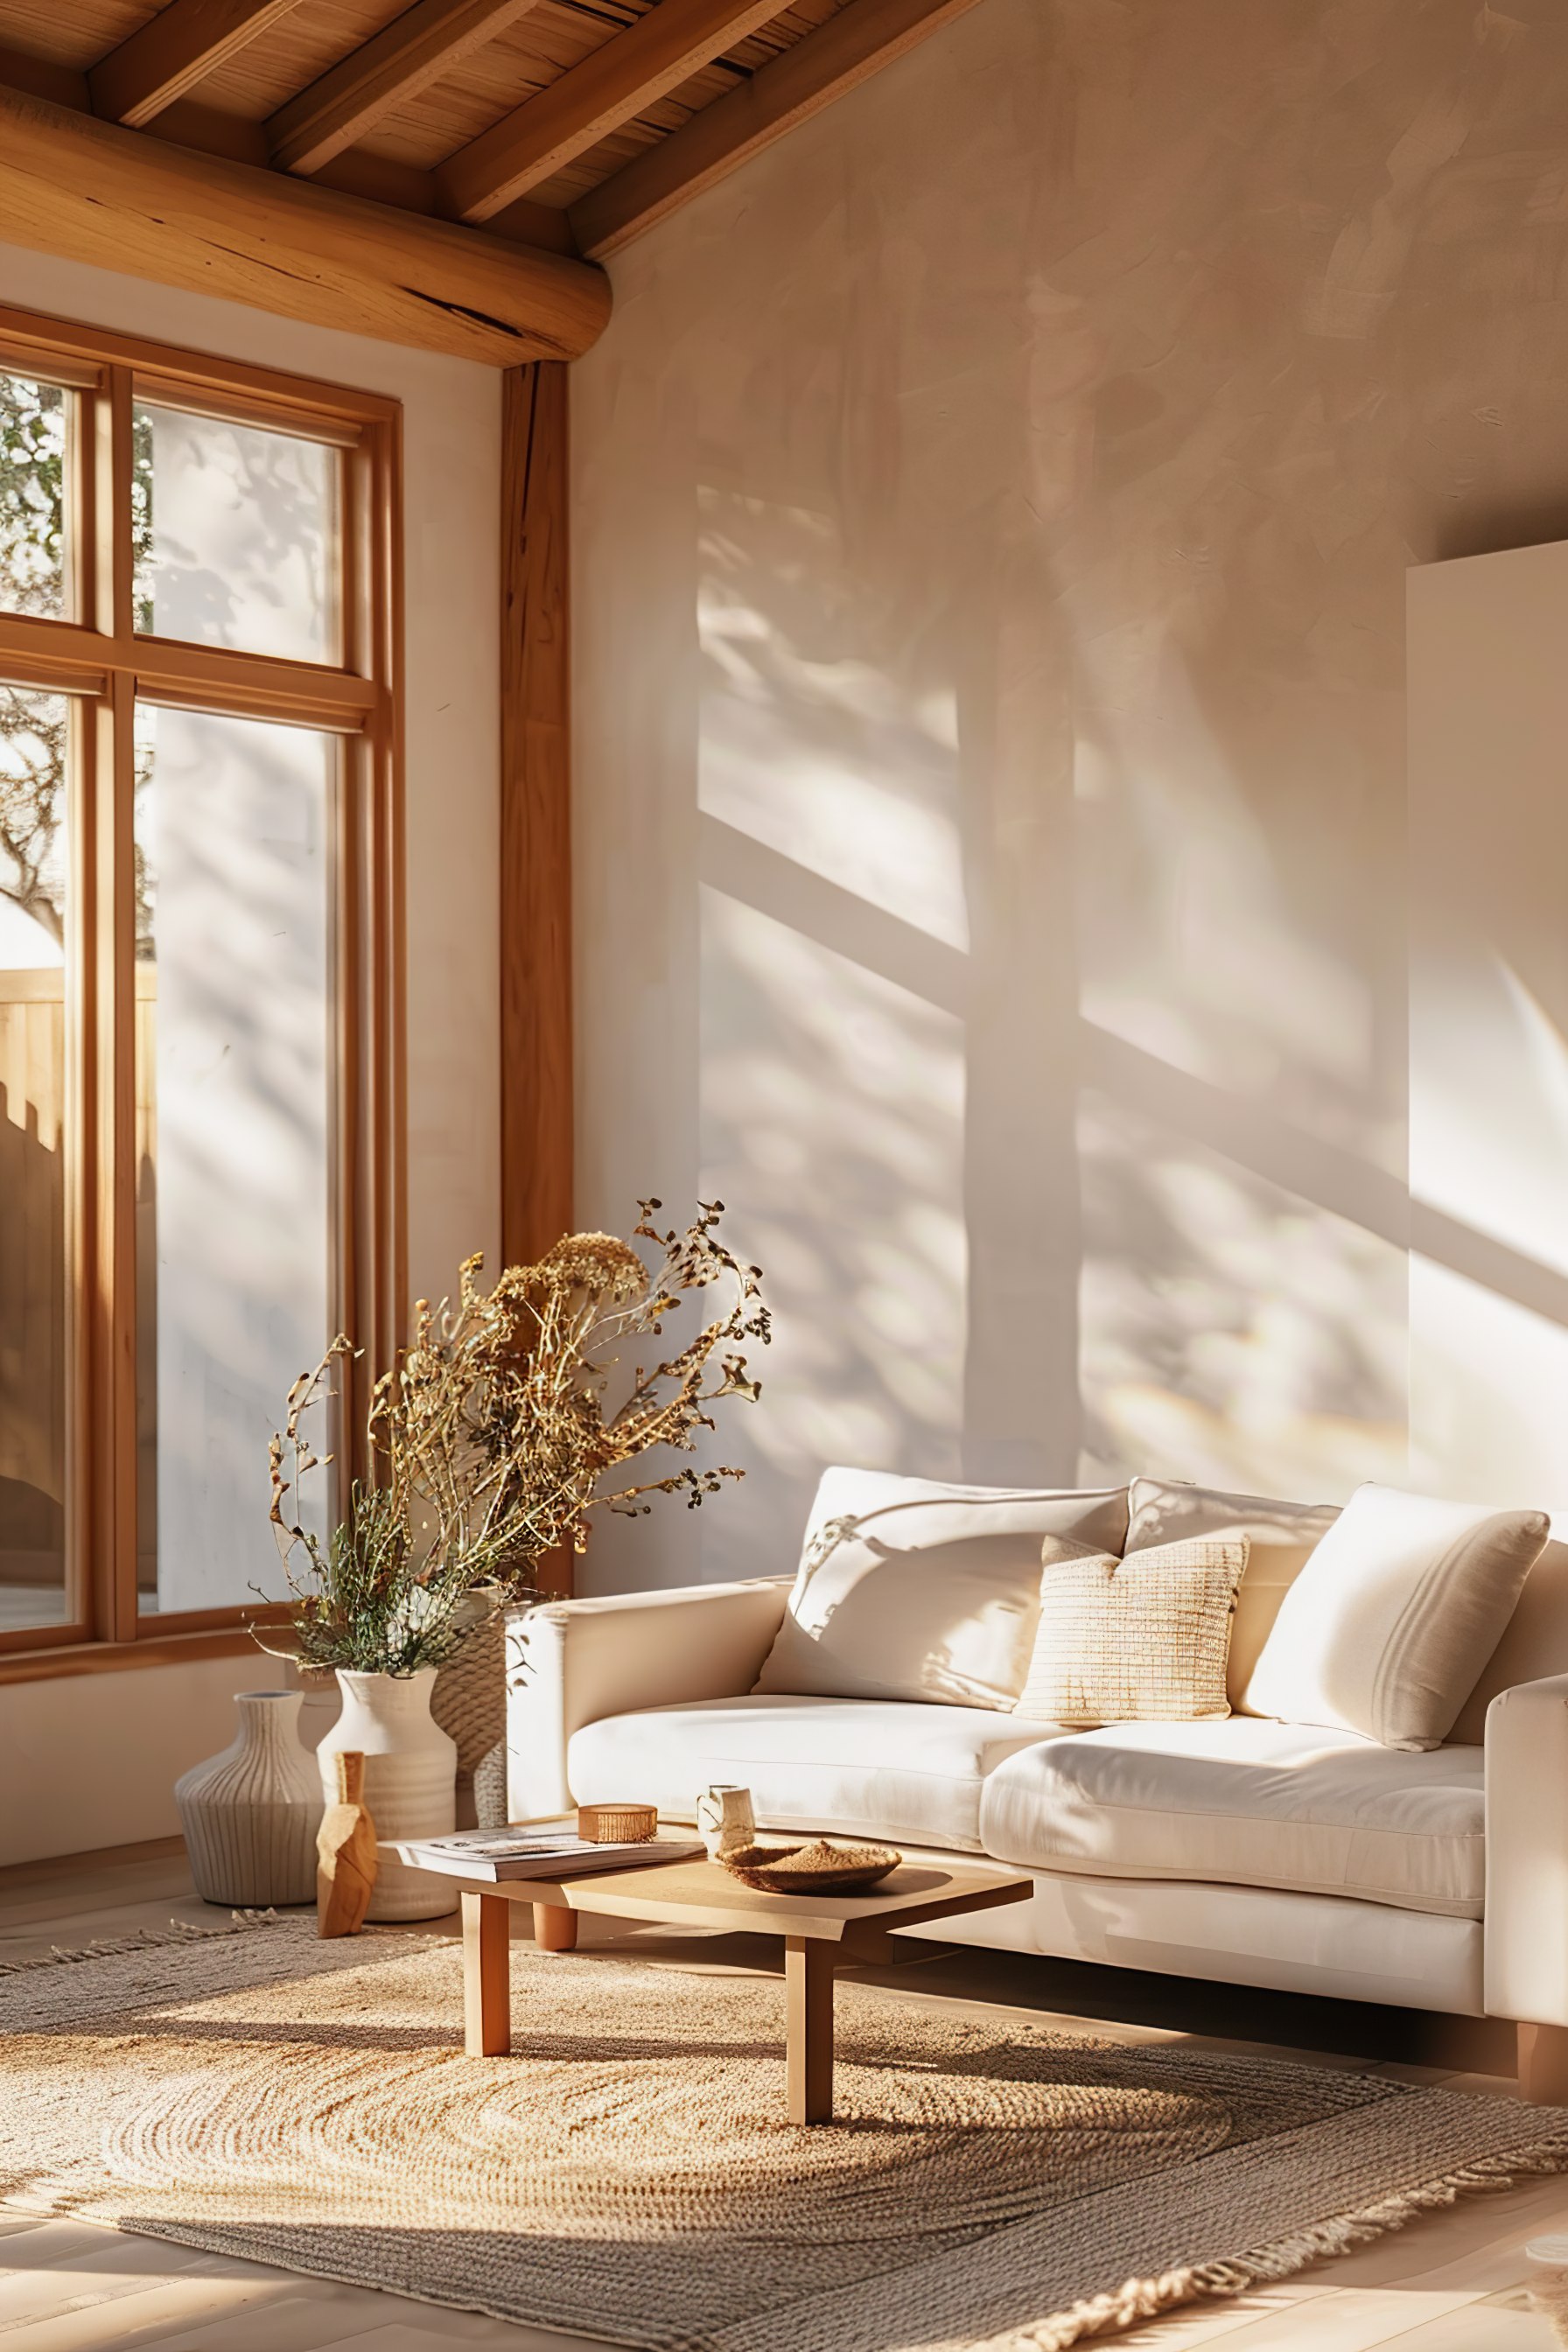 A cozy living room corner with a white sofa, wooden table, textured rugs, and warm sunlight streaming through a large window.